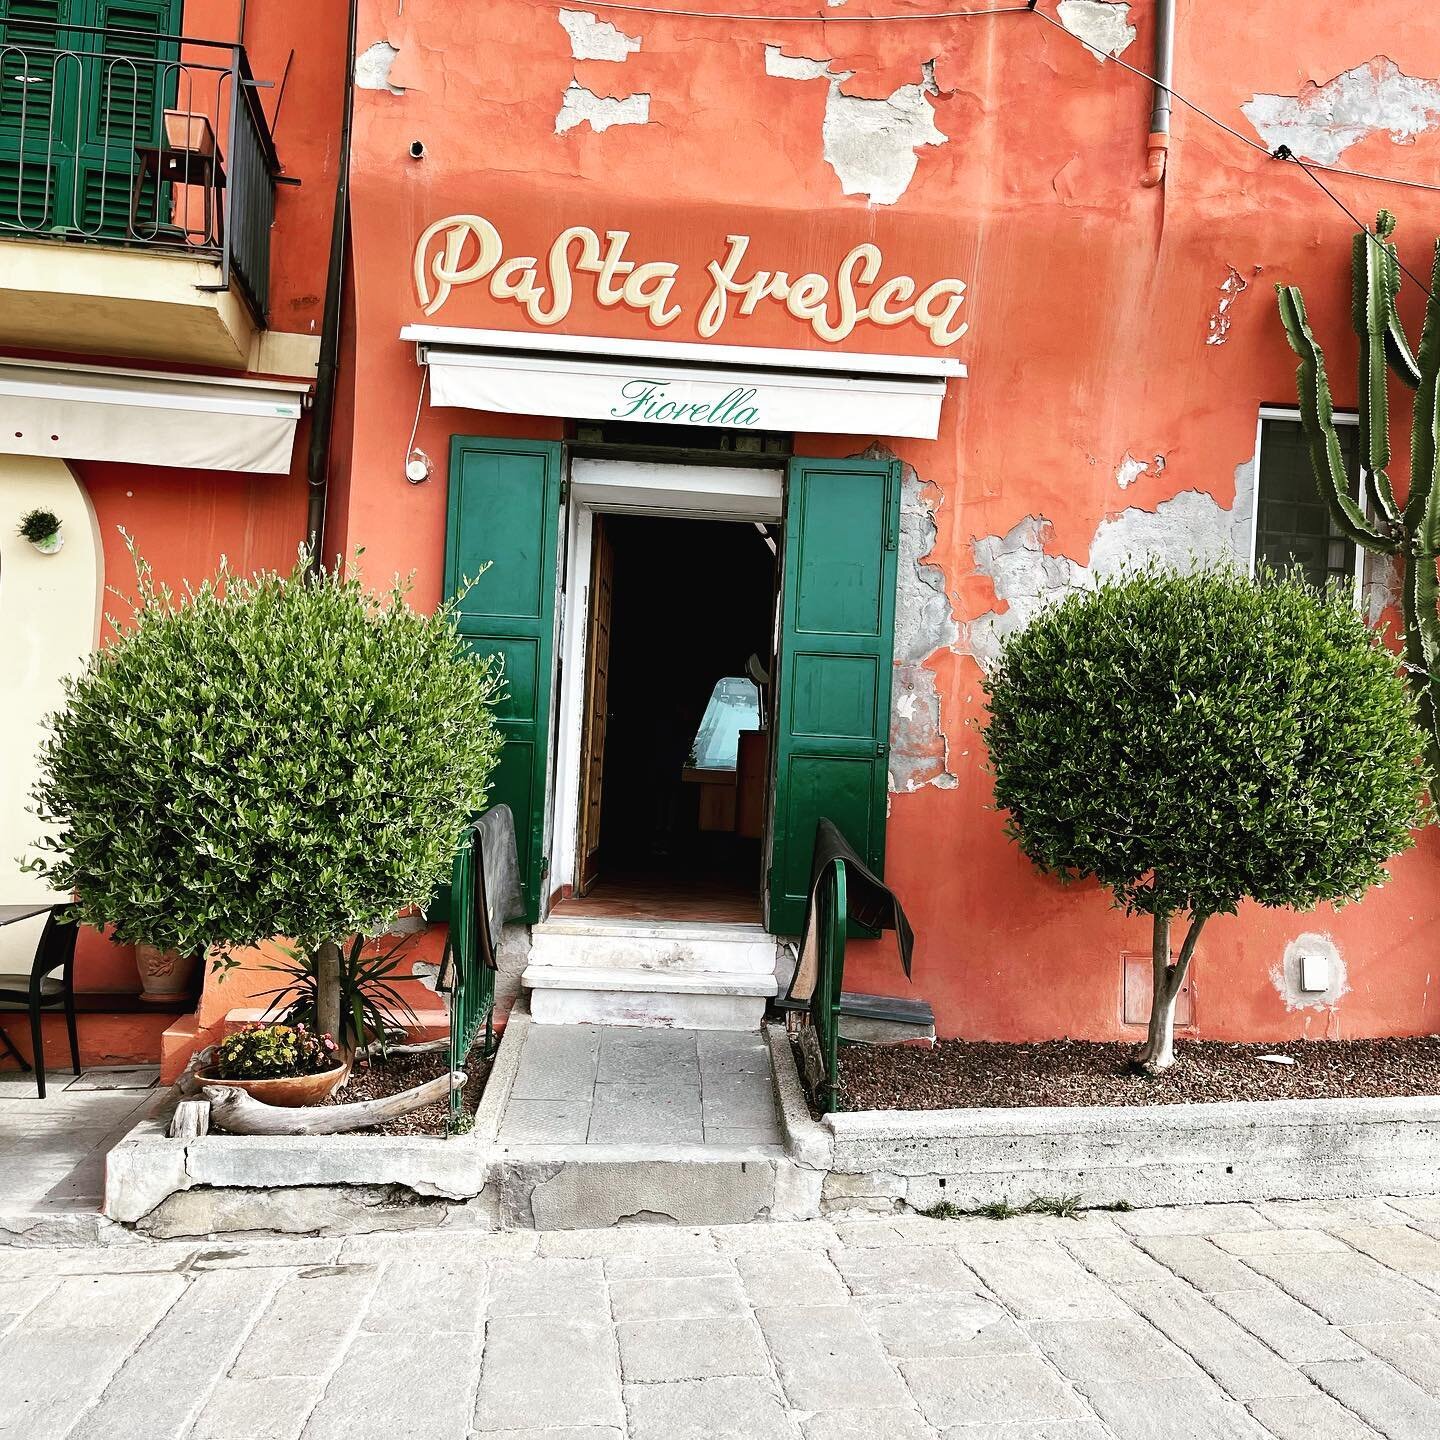 The wild beauty of Camogli has me dreaming again. Seeing a few snaps from @margiemiklas on tour tapped back into that yearning for some Italian Riviera mood that I find so intoxicating 🧡

.
.
.
.
.
.
#colours #colorful #italytrip #bellezza #italytra